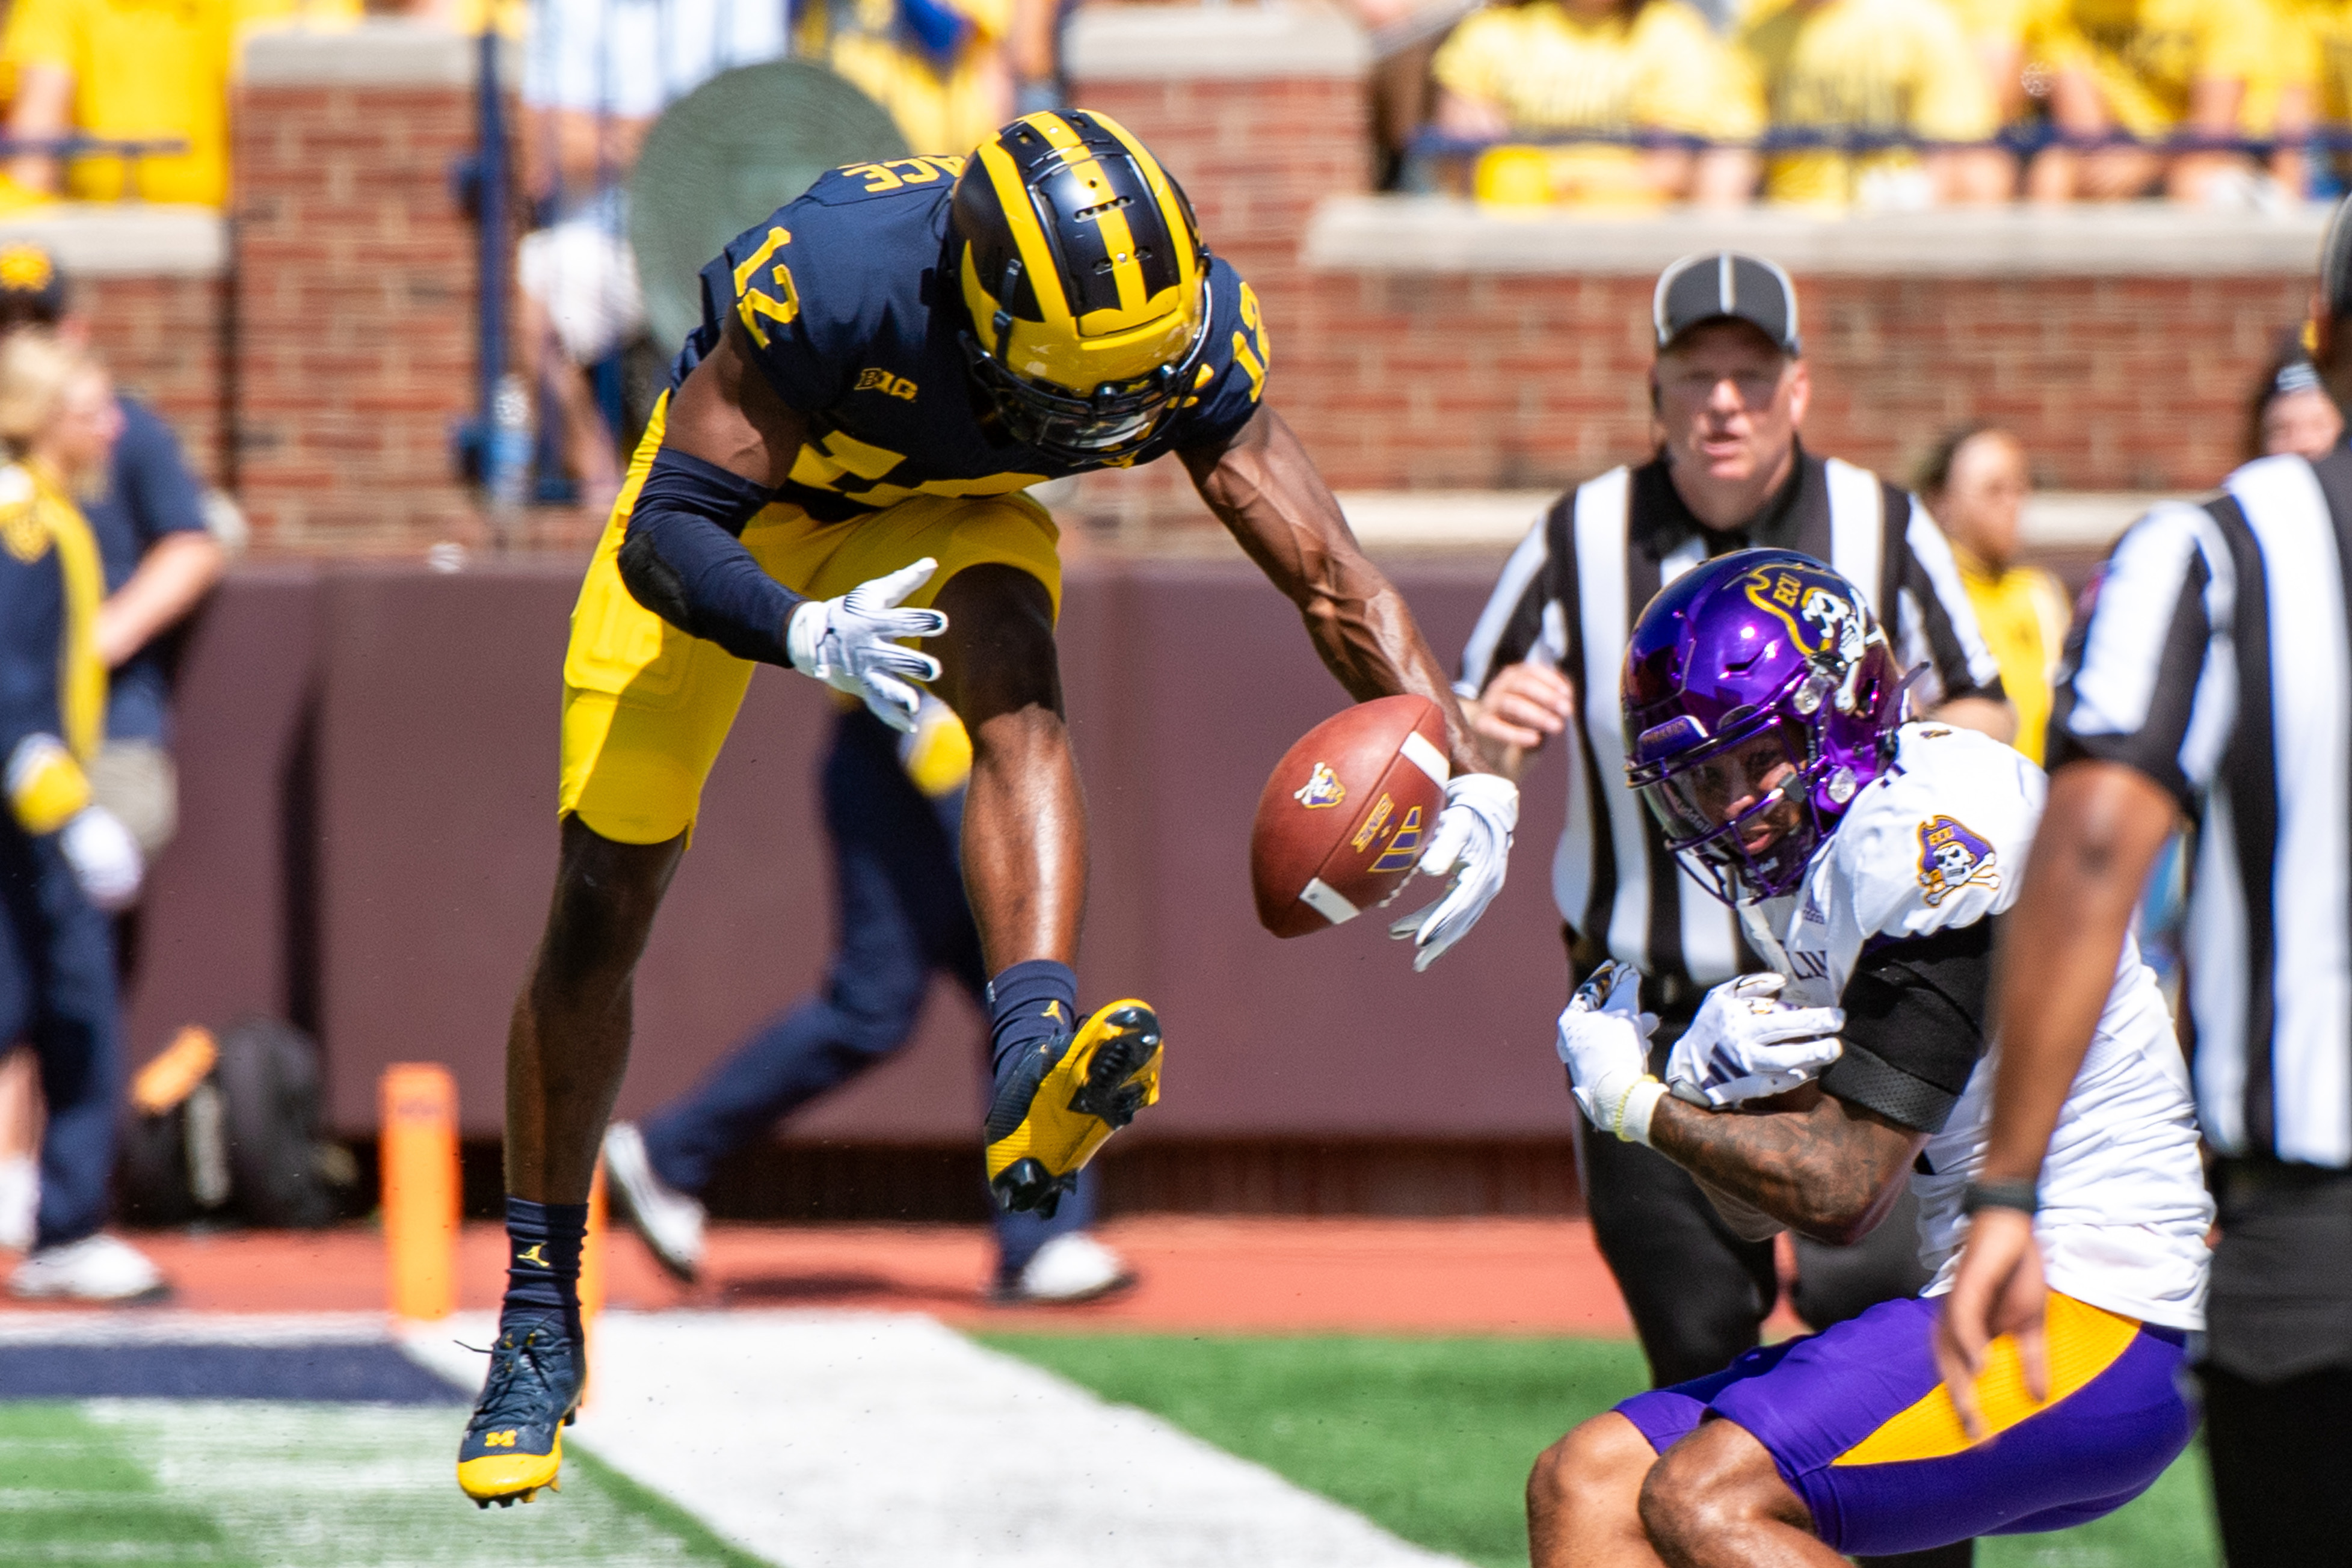 Why Josh Wallace's interception was ruled incomplete in Michigan